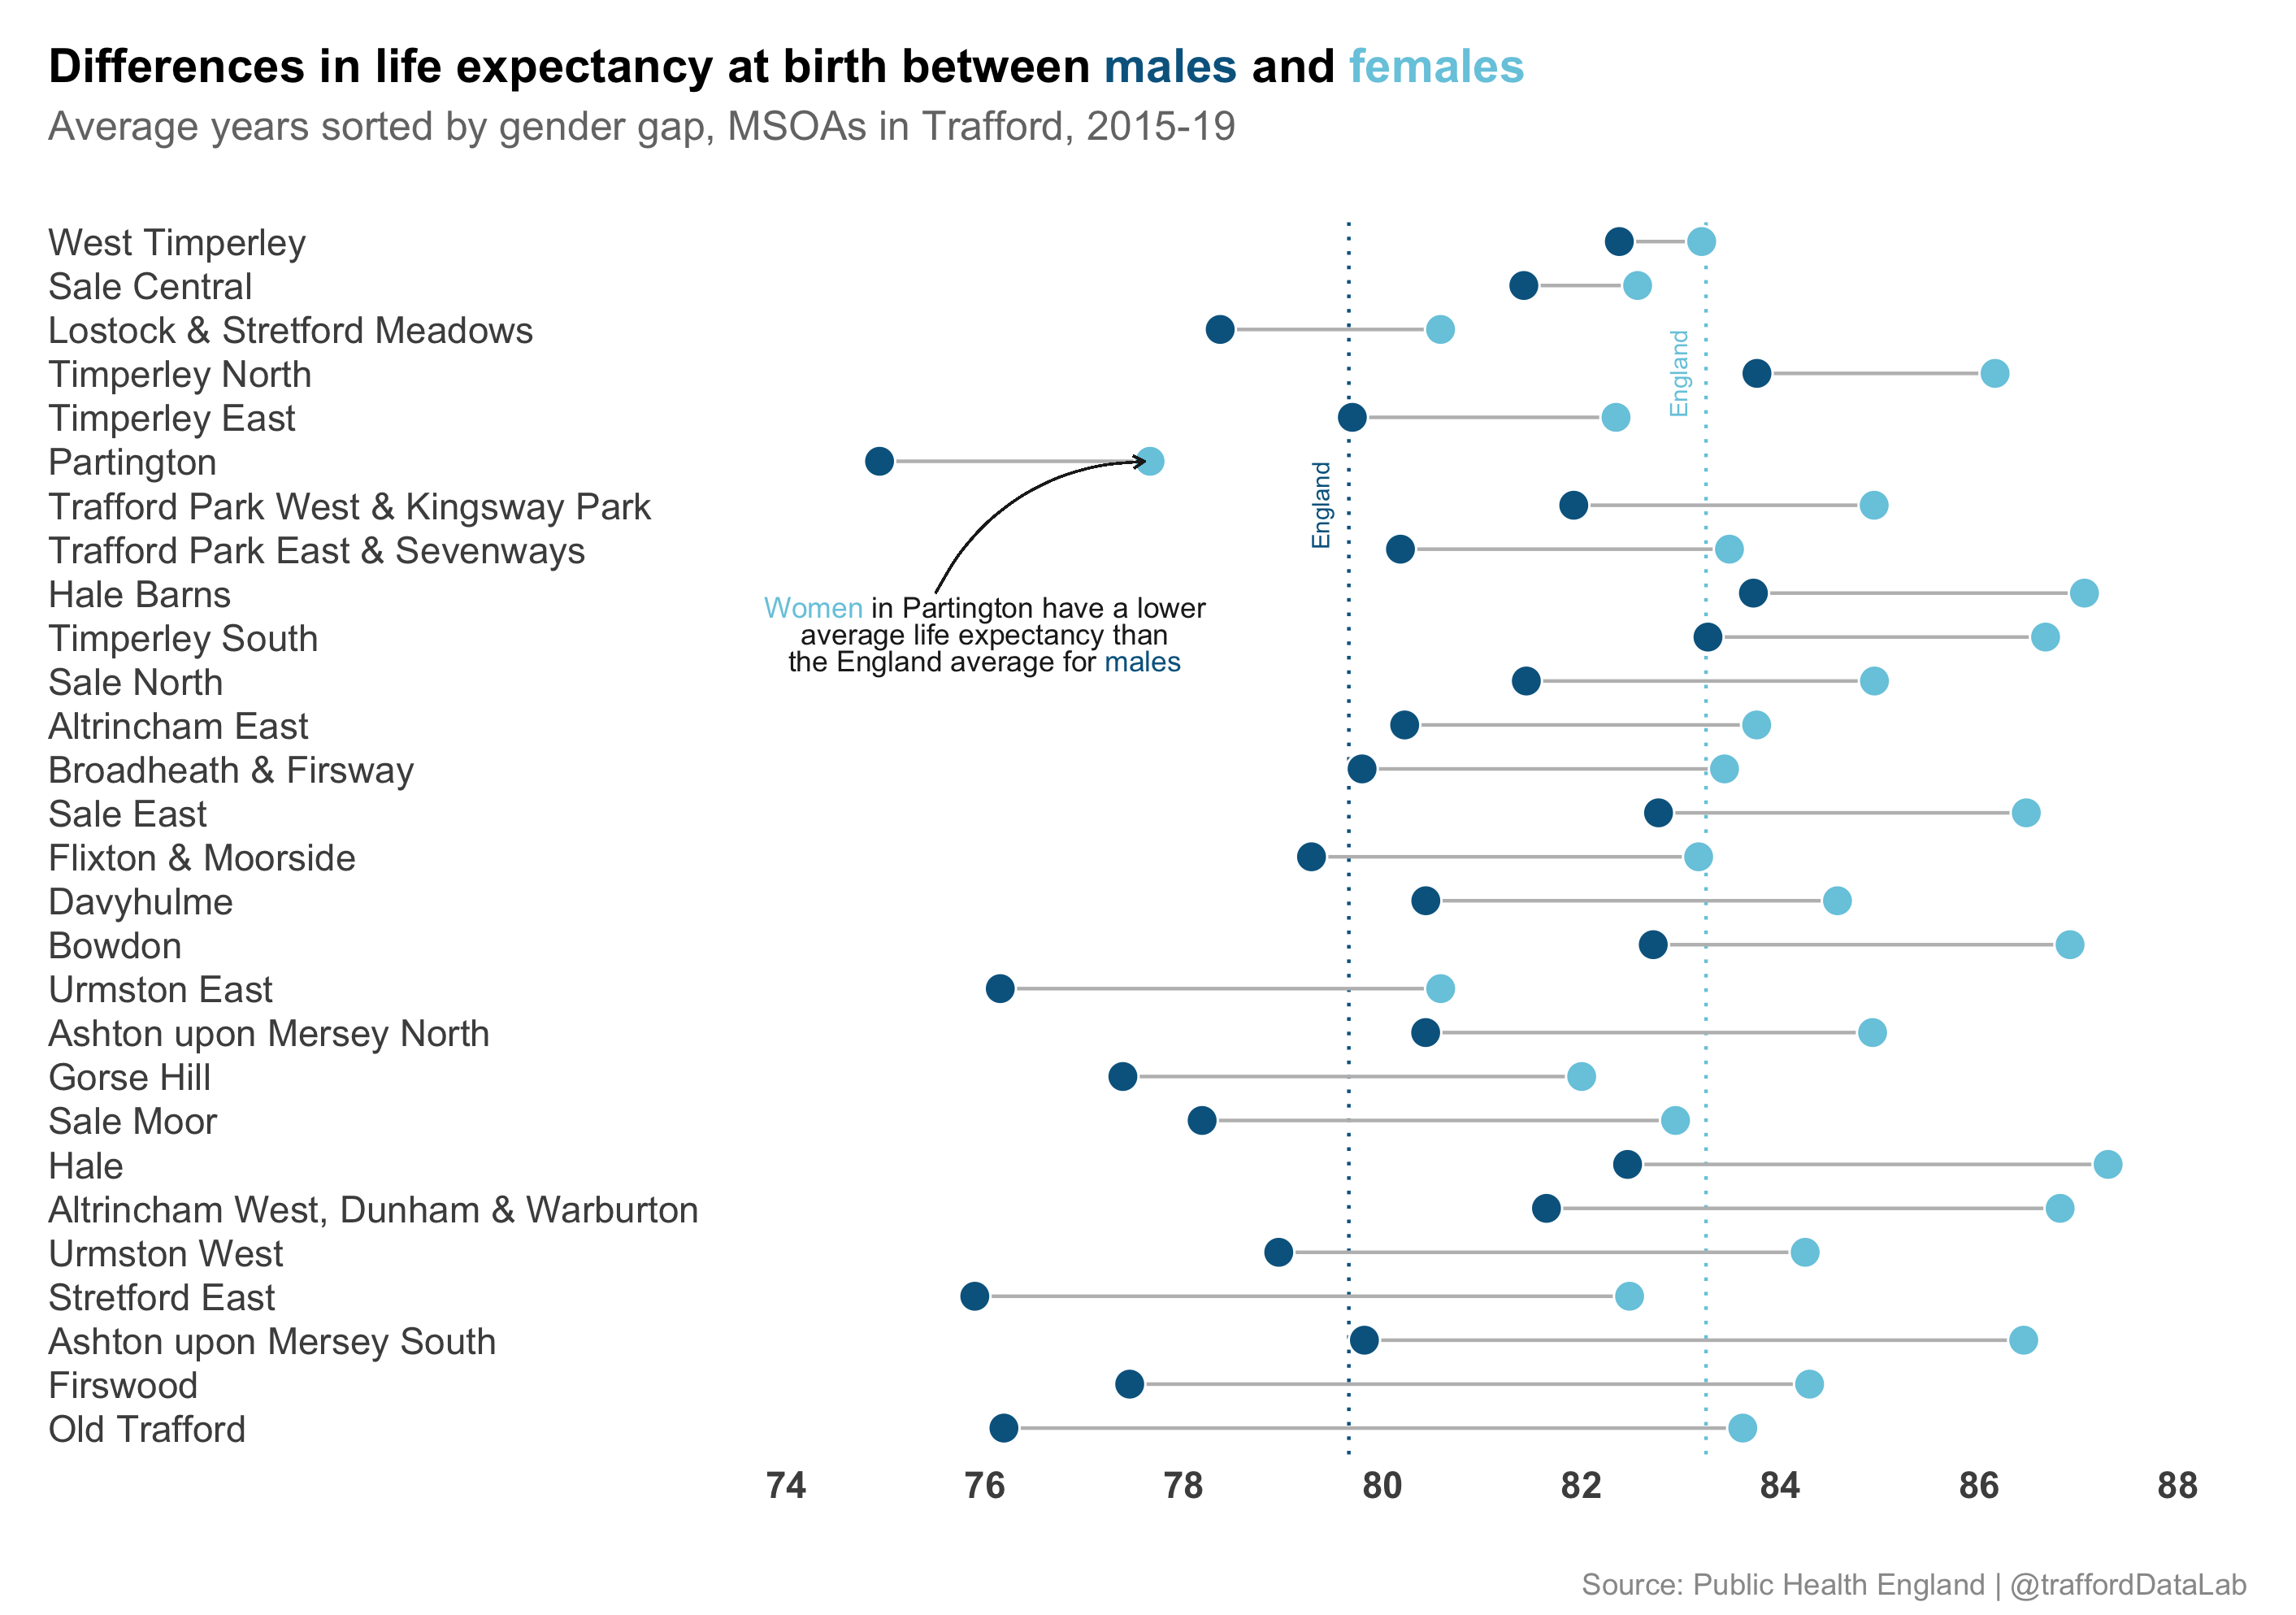 Chart showing differences in life expectancy between males and females in small areas of Trafford